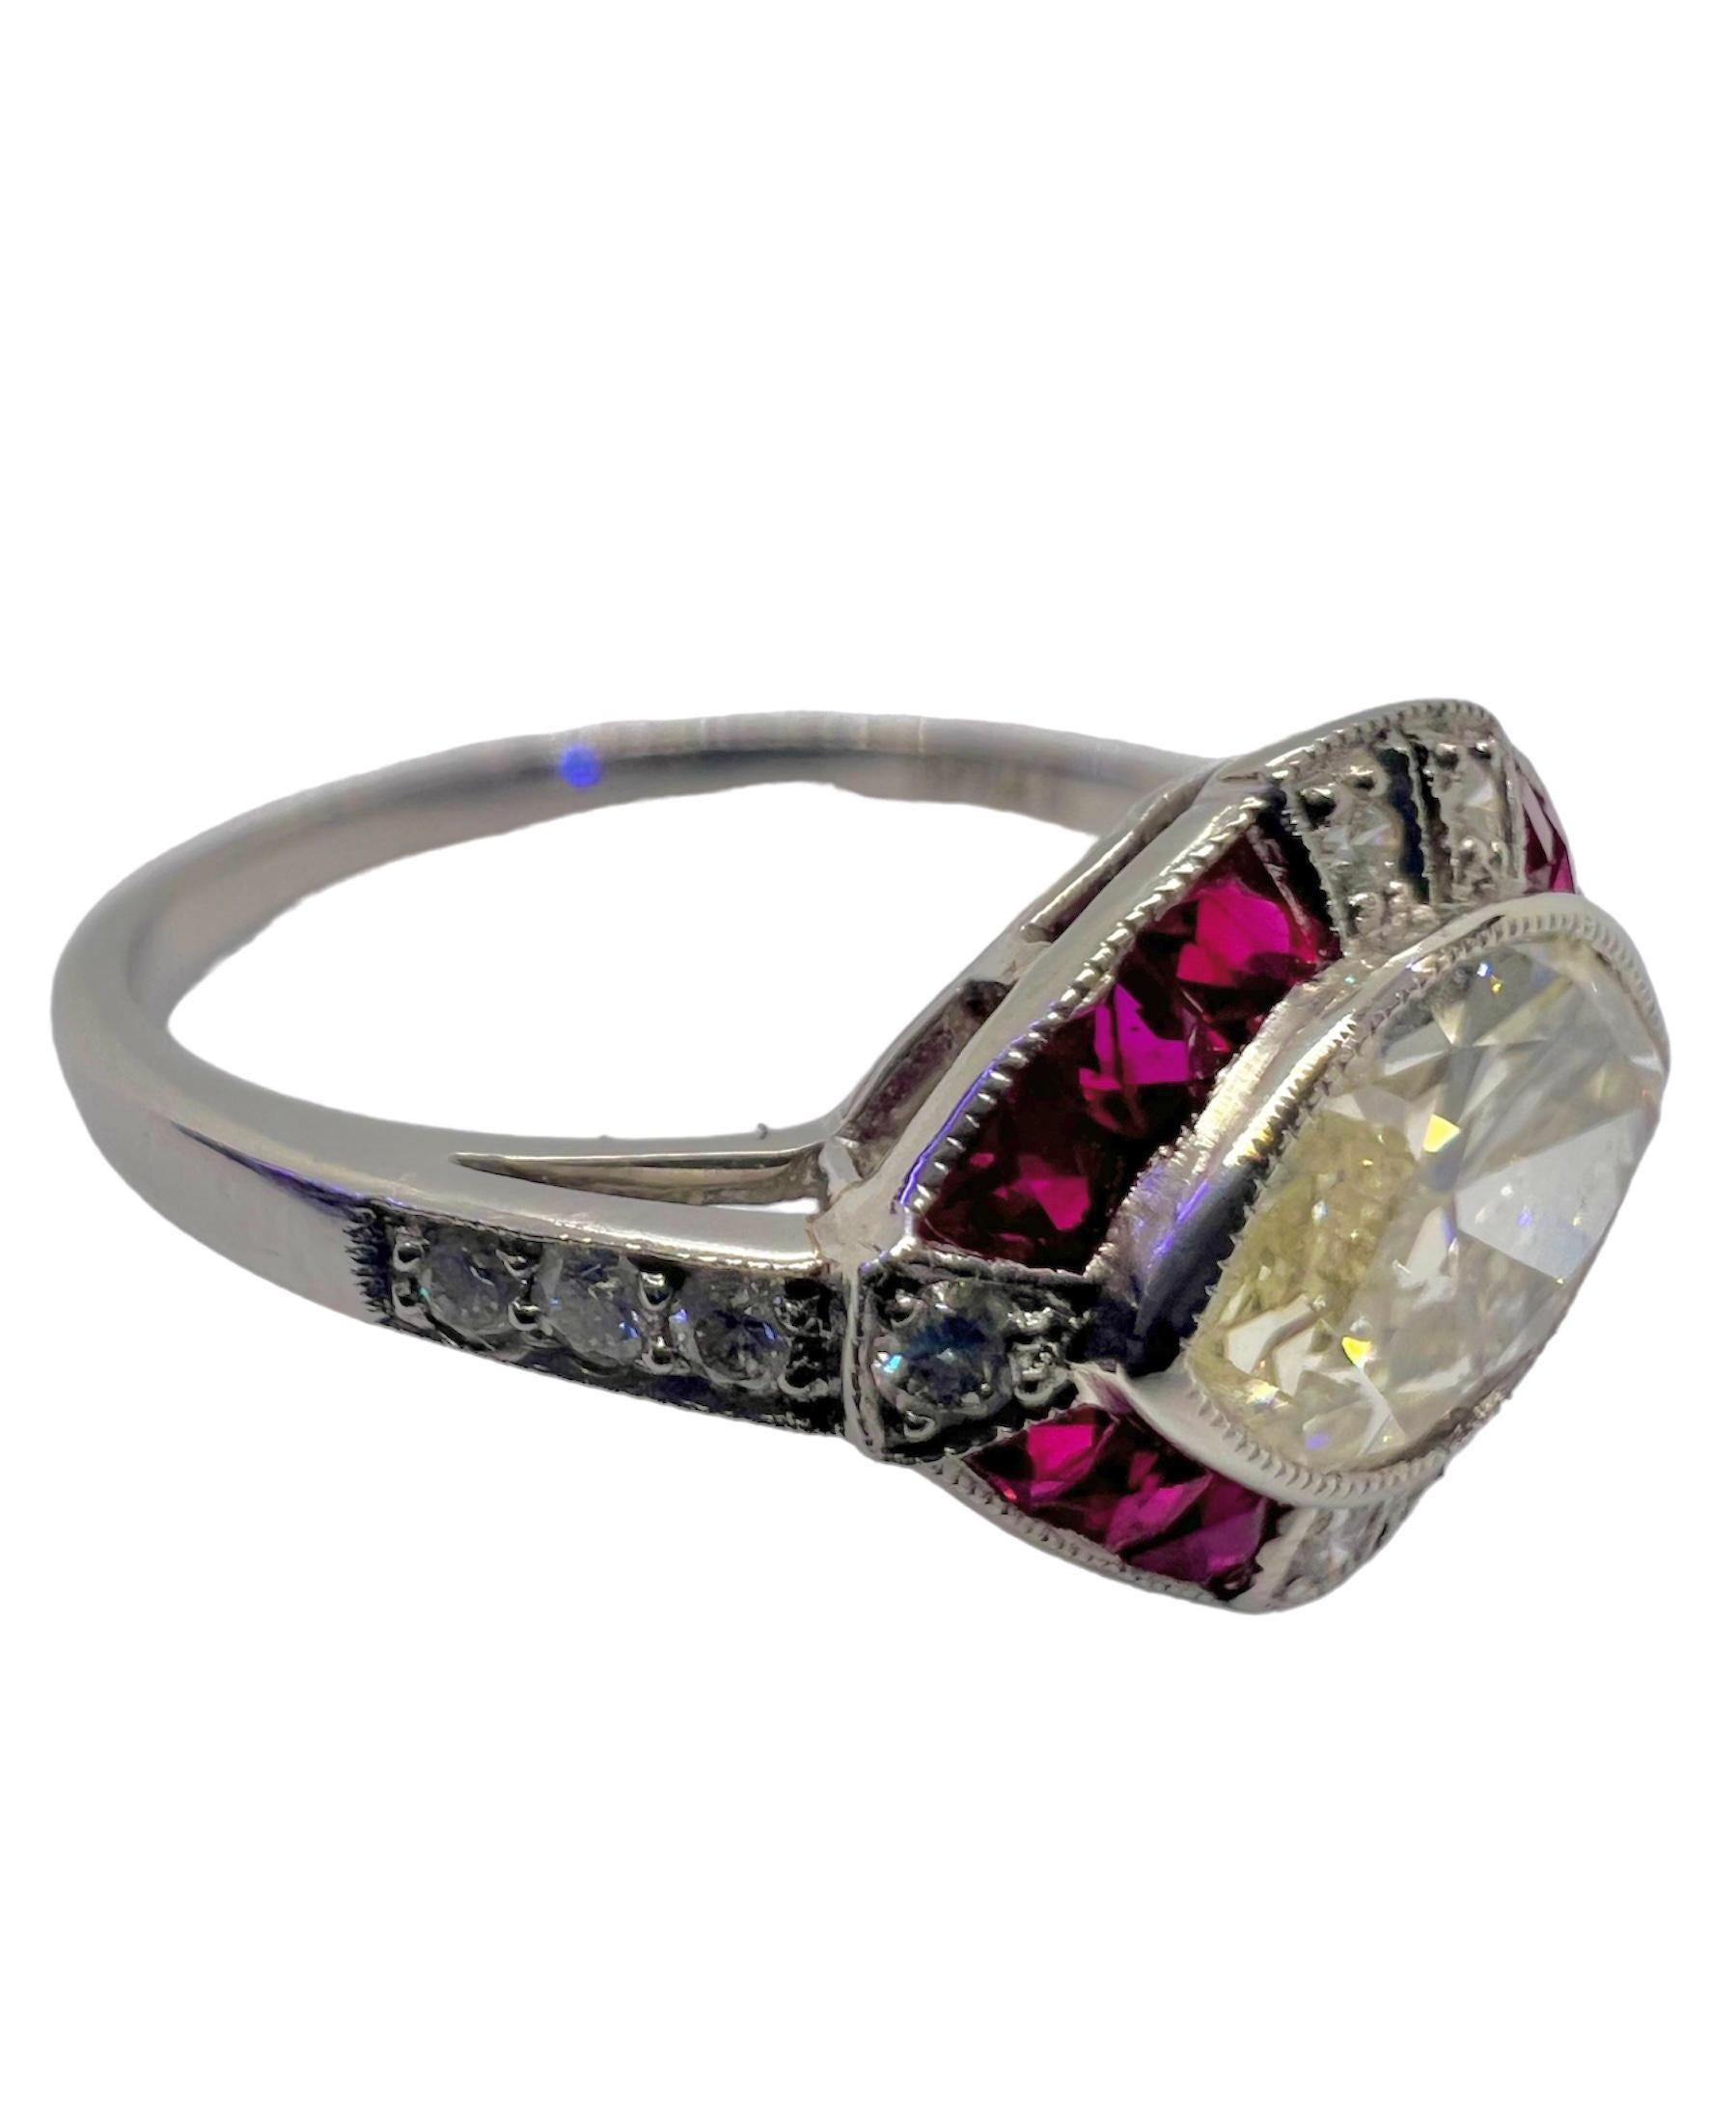 Art deco style ring set in platinum that features a 1.00 carat marquise cut center diamond, 0.94 carat ruby and 0.14 carat diamond.

Sophia D by Joseph Dardashti LTD has been known worldwide for 35 years and are inspired by classic Art Deco design